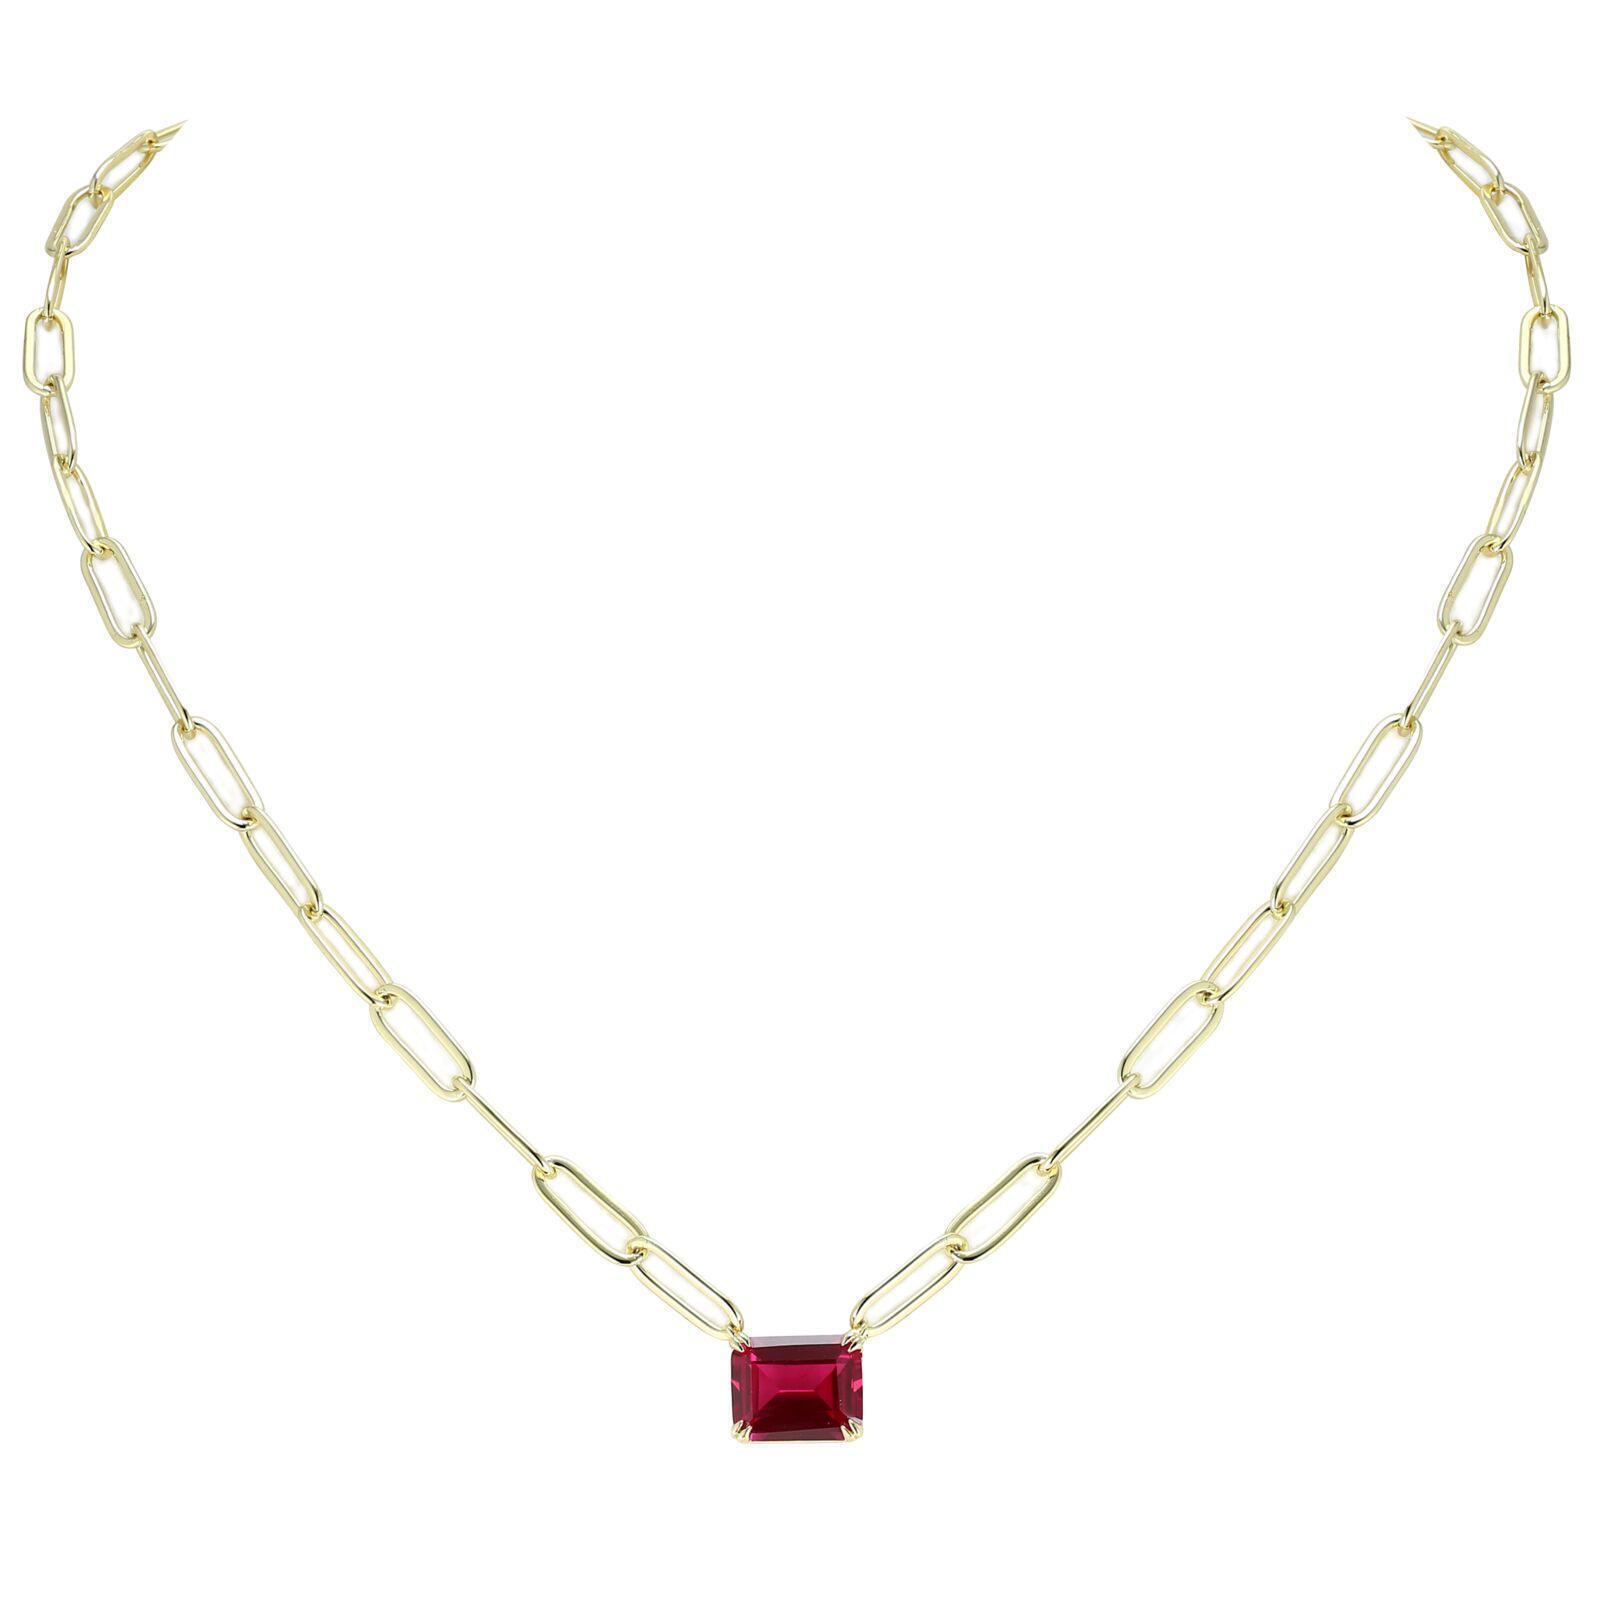 SCARLETT - Petite Solitaire Paperclip Necklace